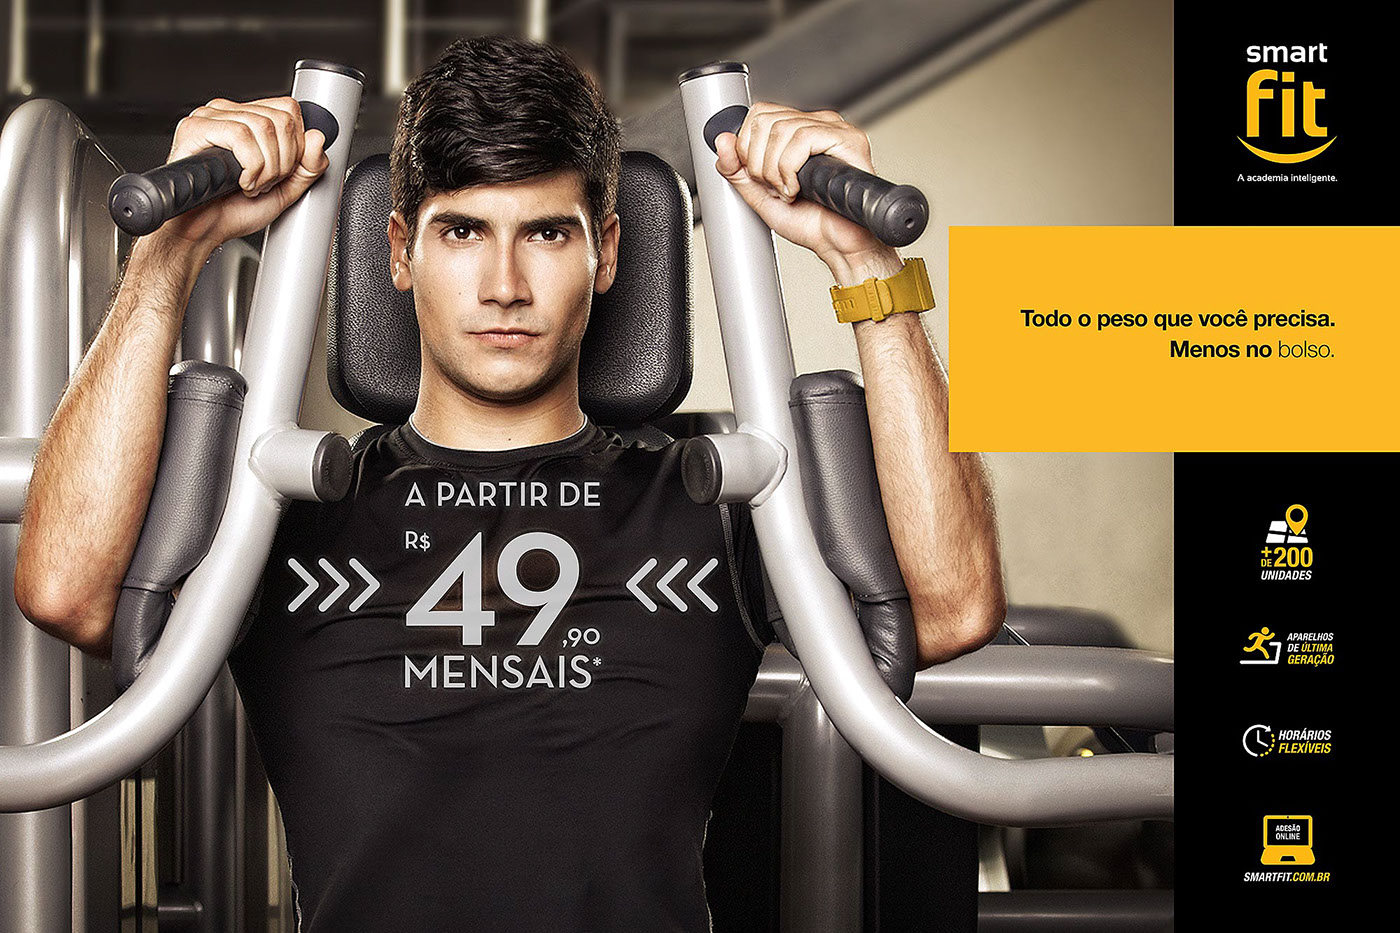 Smart FIT academy ad campaign advertisement fitness workout gym